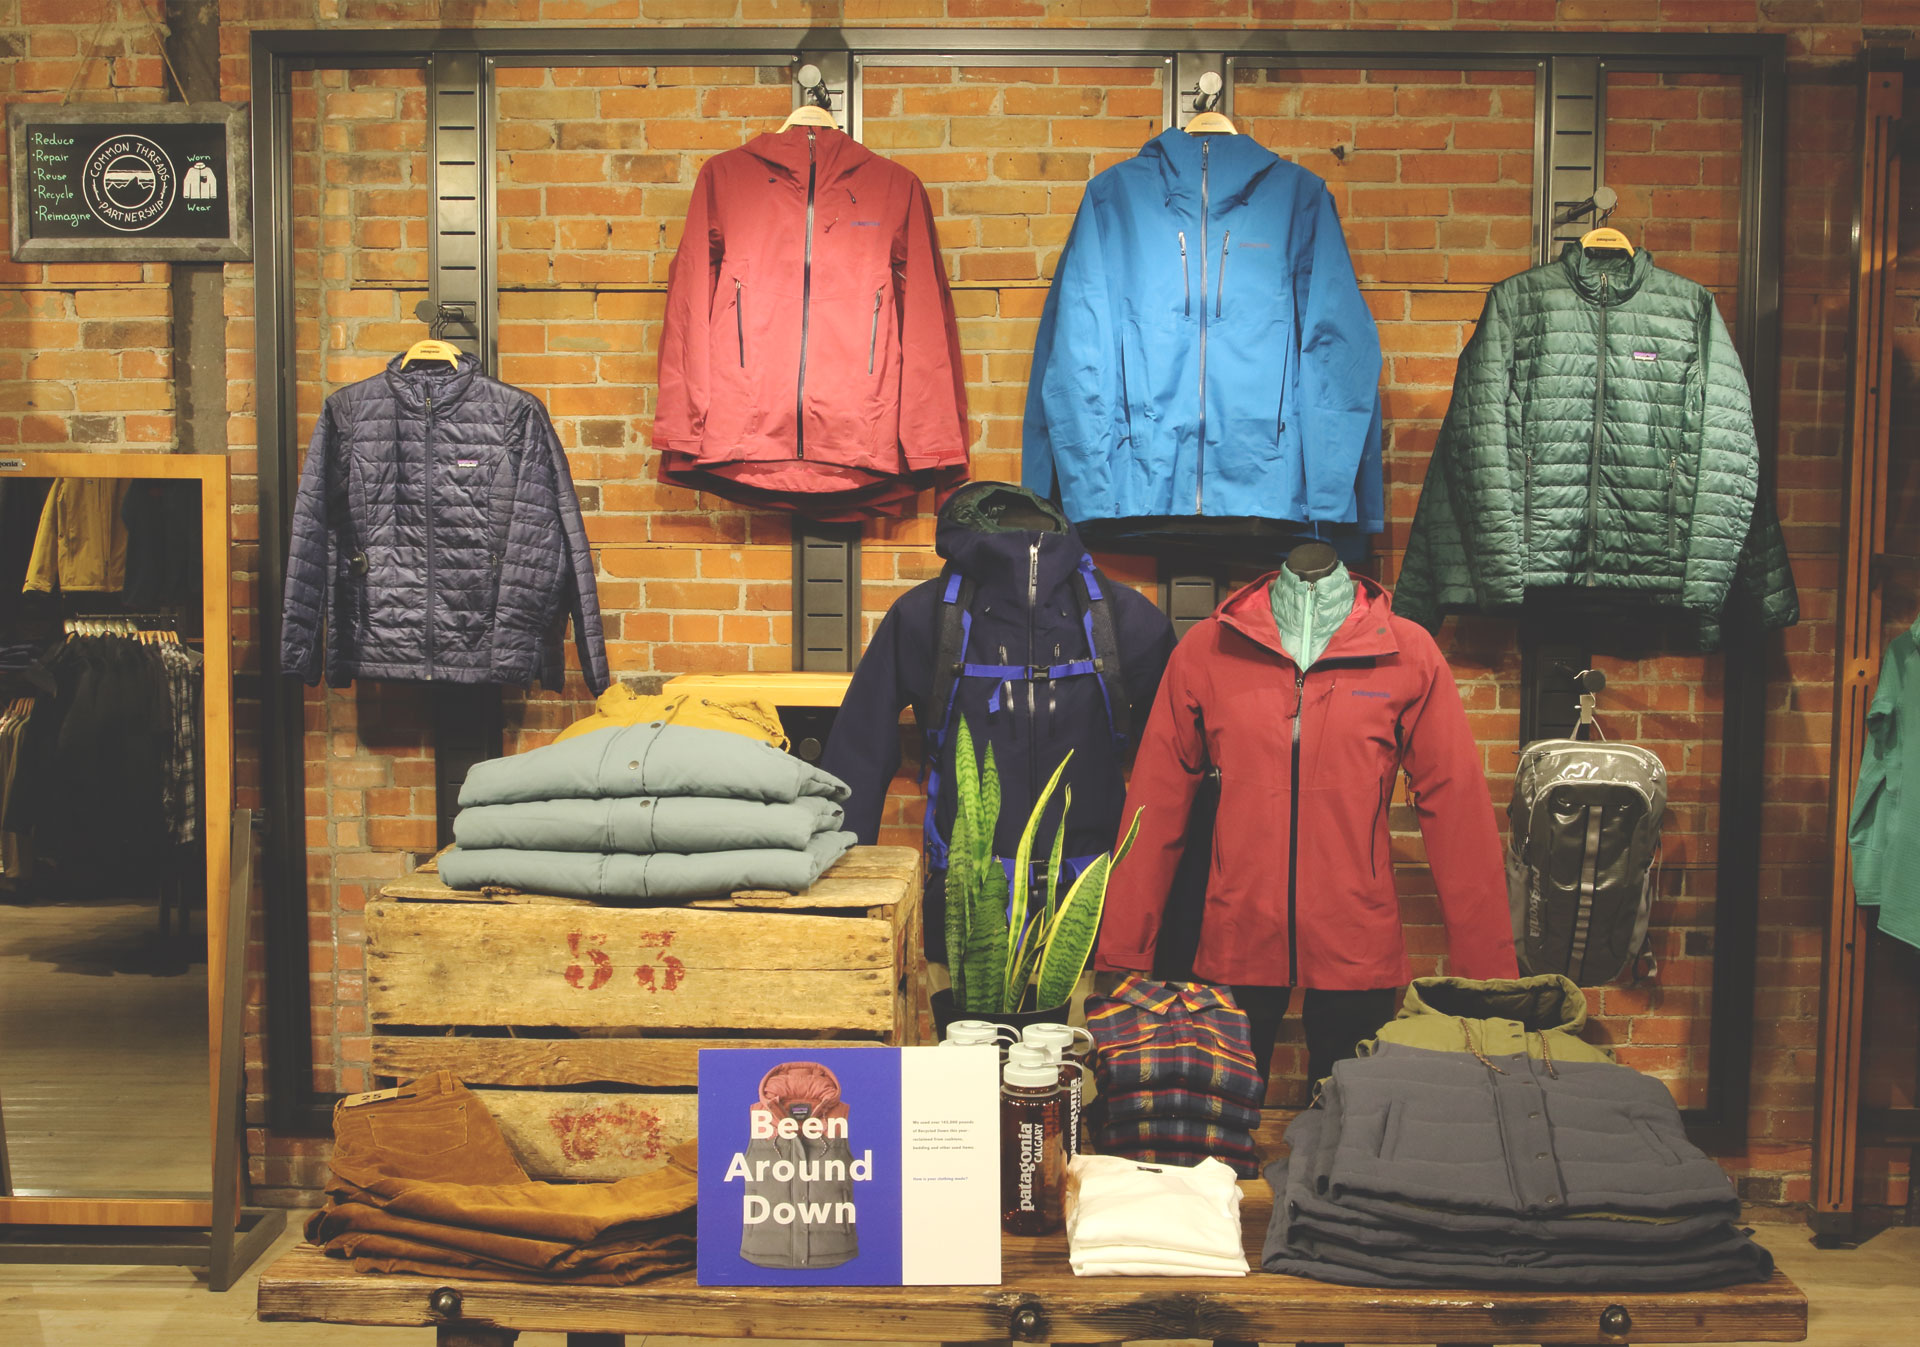 Gear up at Patagonia Calgary on 17th Avenue.